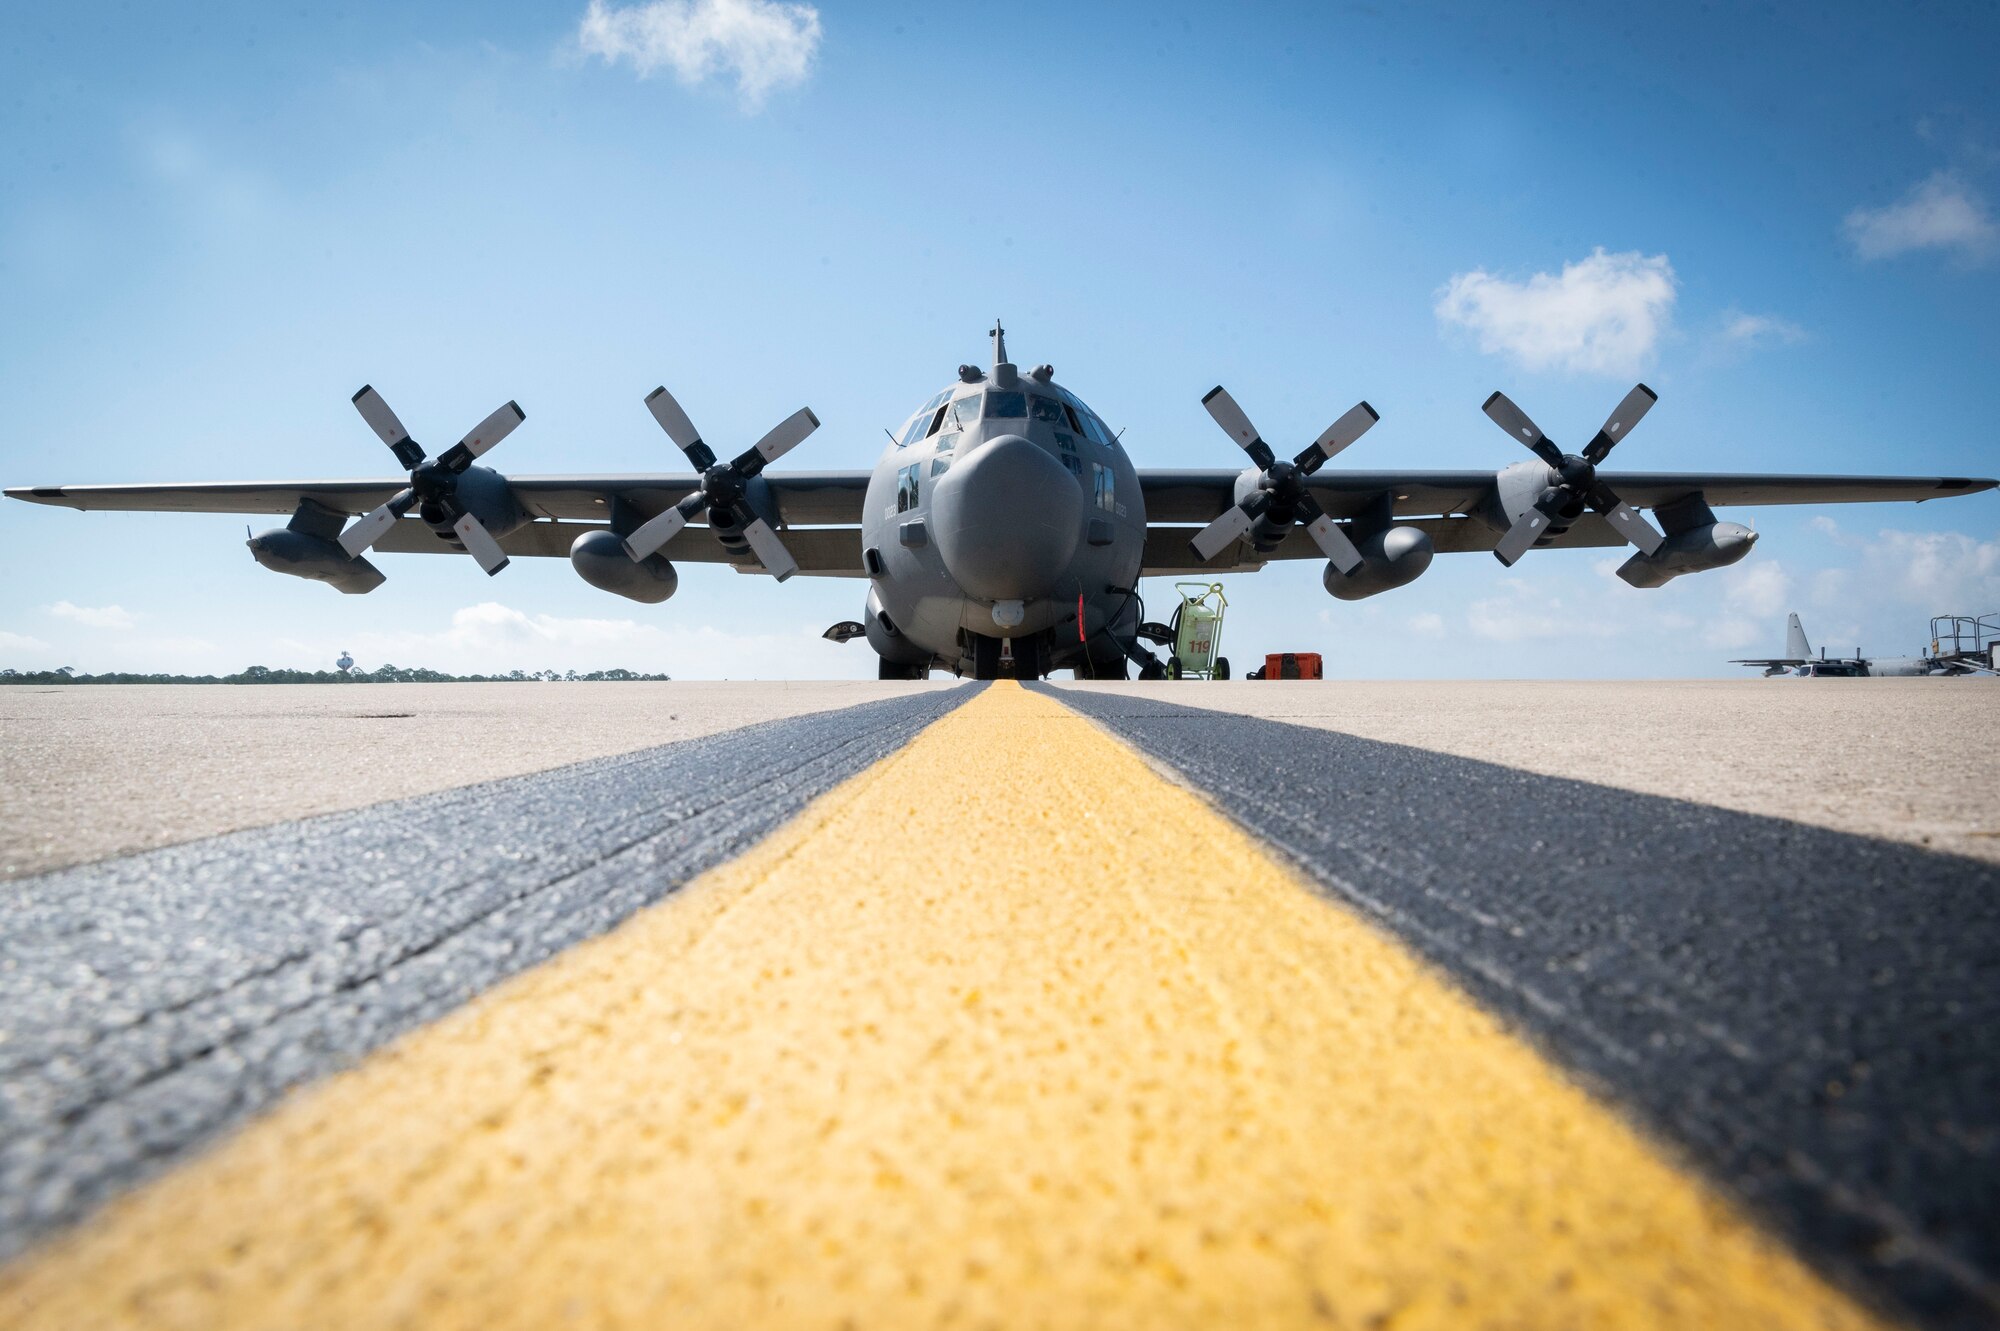 The MC-130H Combat Talon II used for the airframe’s final flight under the 492nd Special Operations Wing is photographed before take-off at Hurlburt Field, Florida, May 31, 2022.